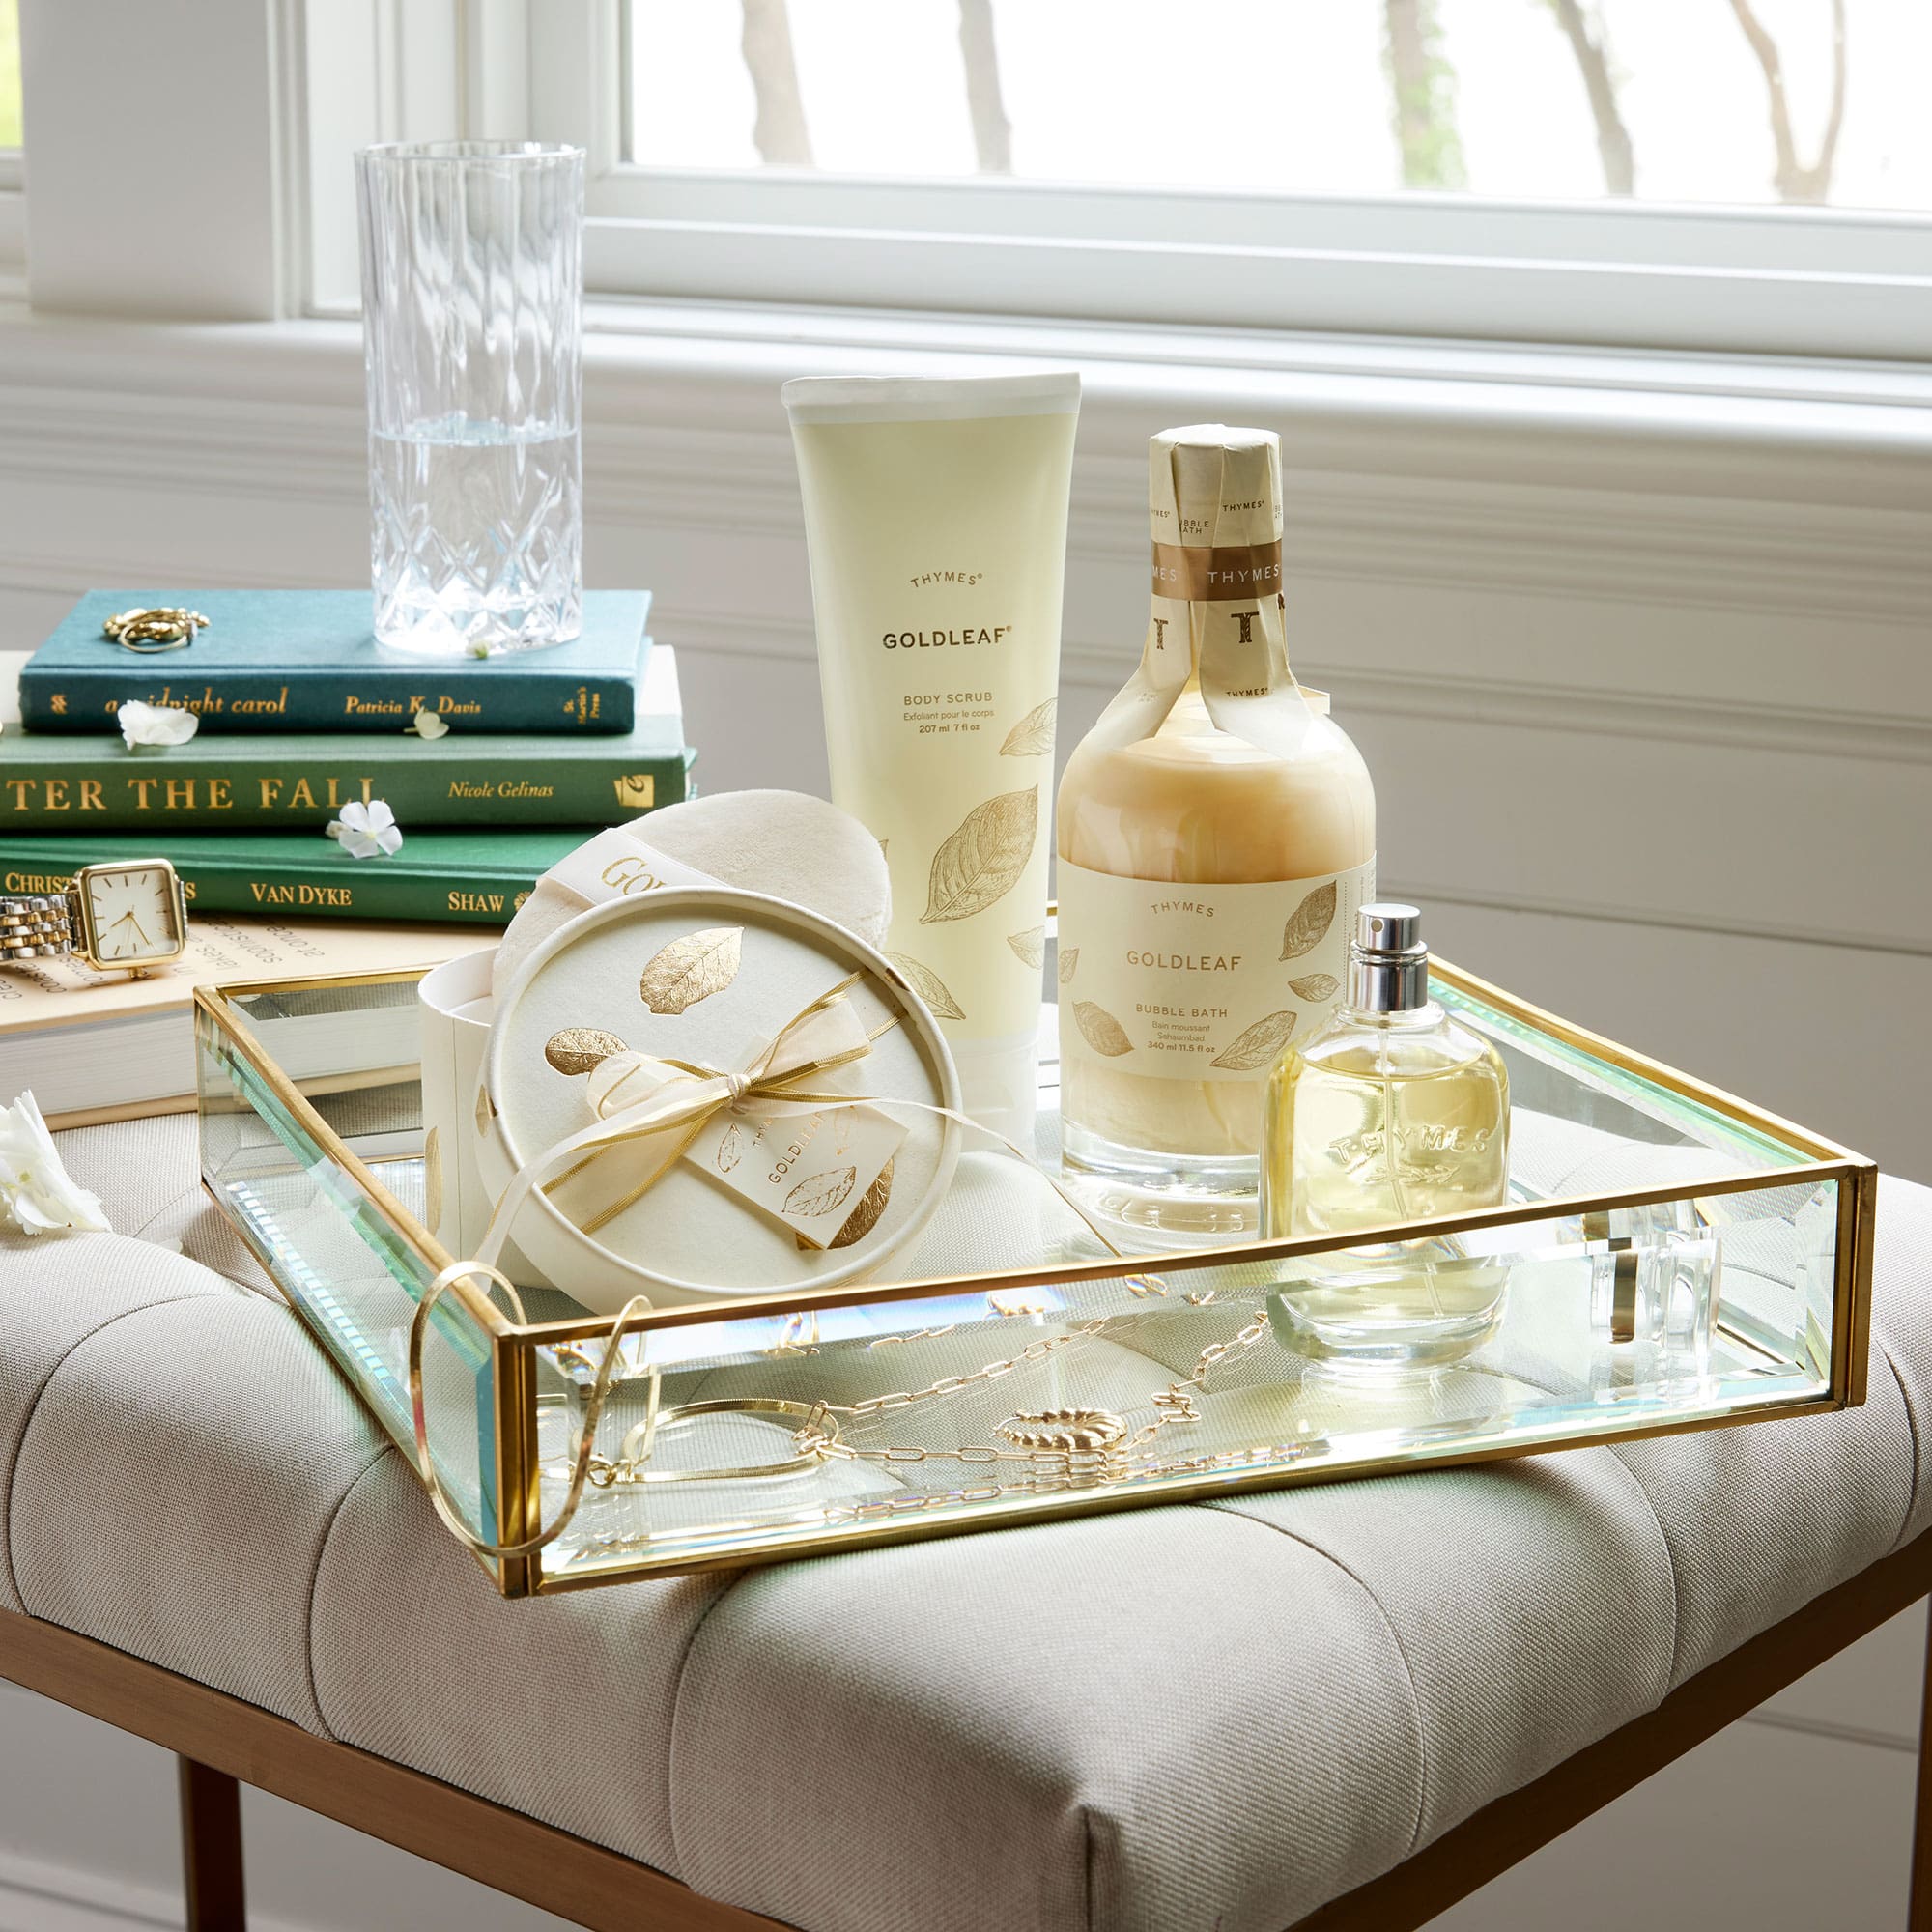 Thymes Goldleaf is one of of Thymes oldest and most popular